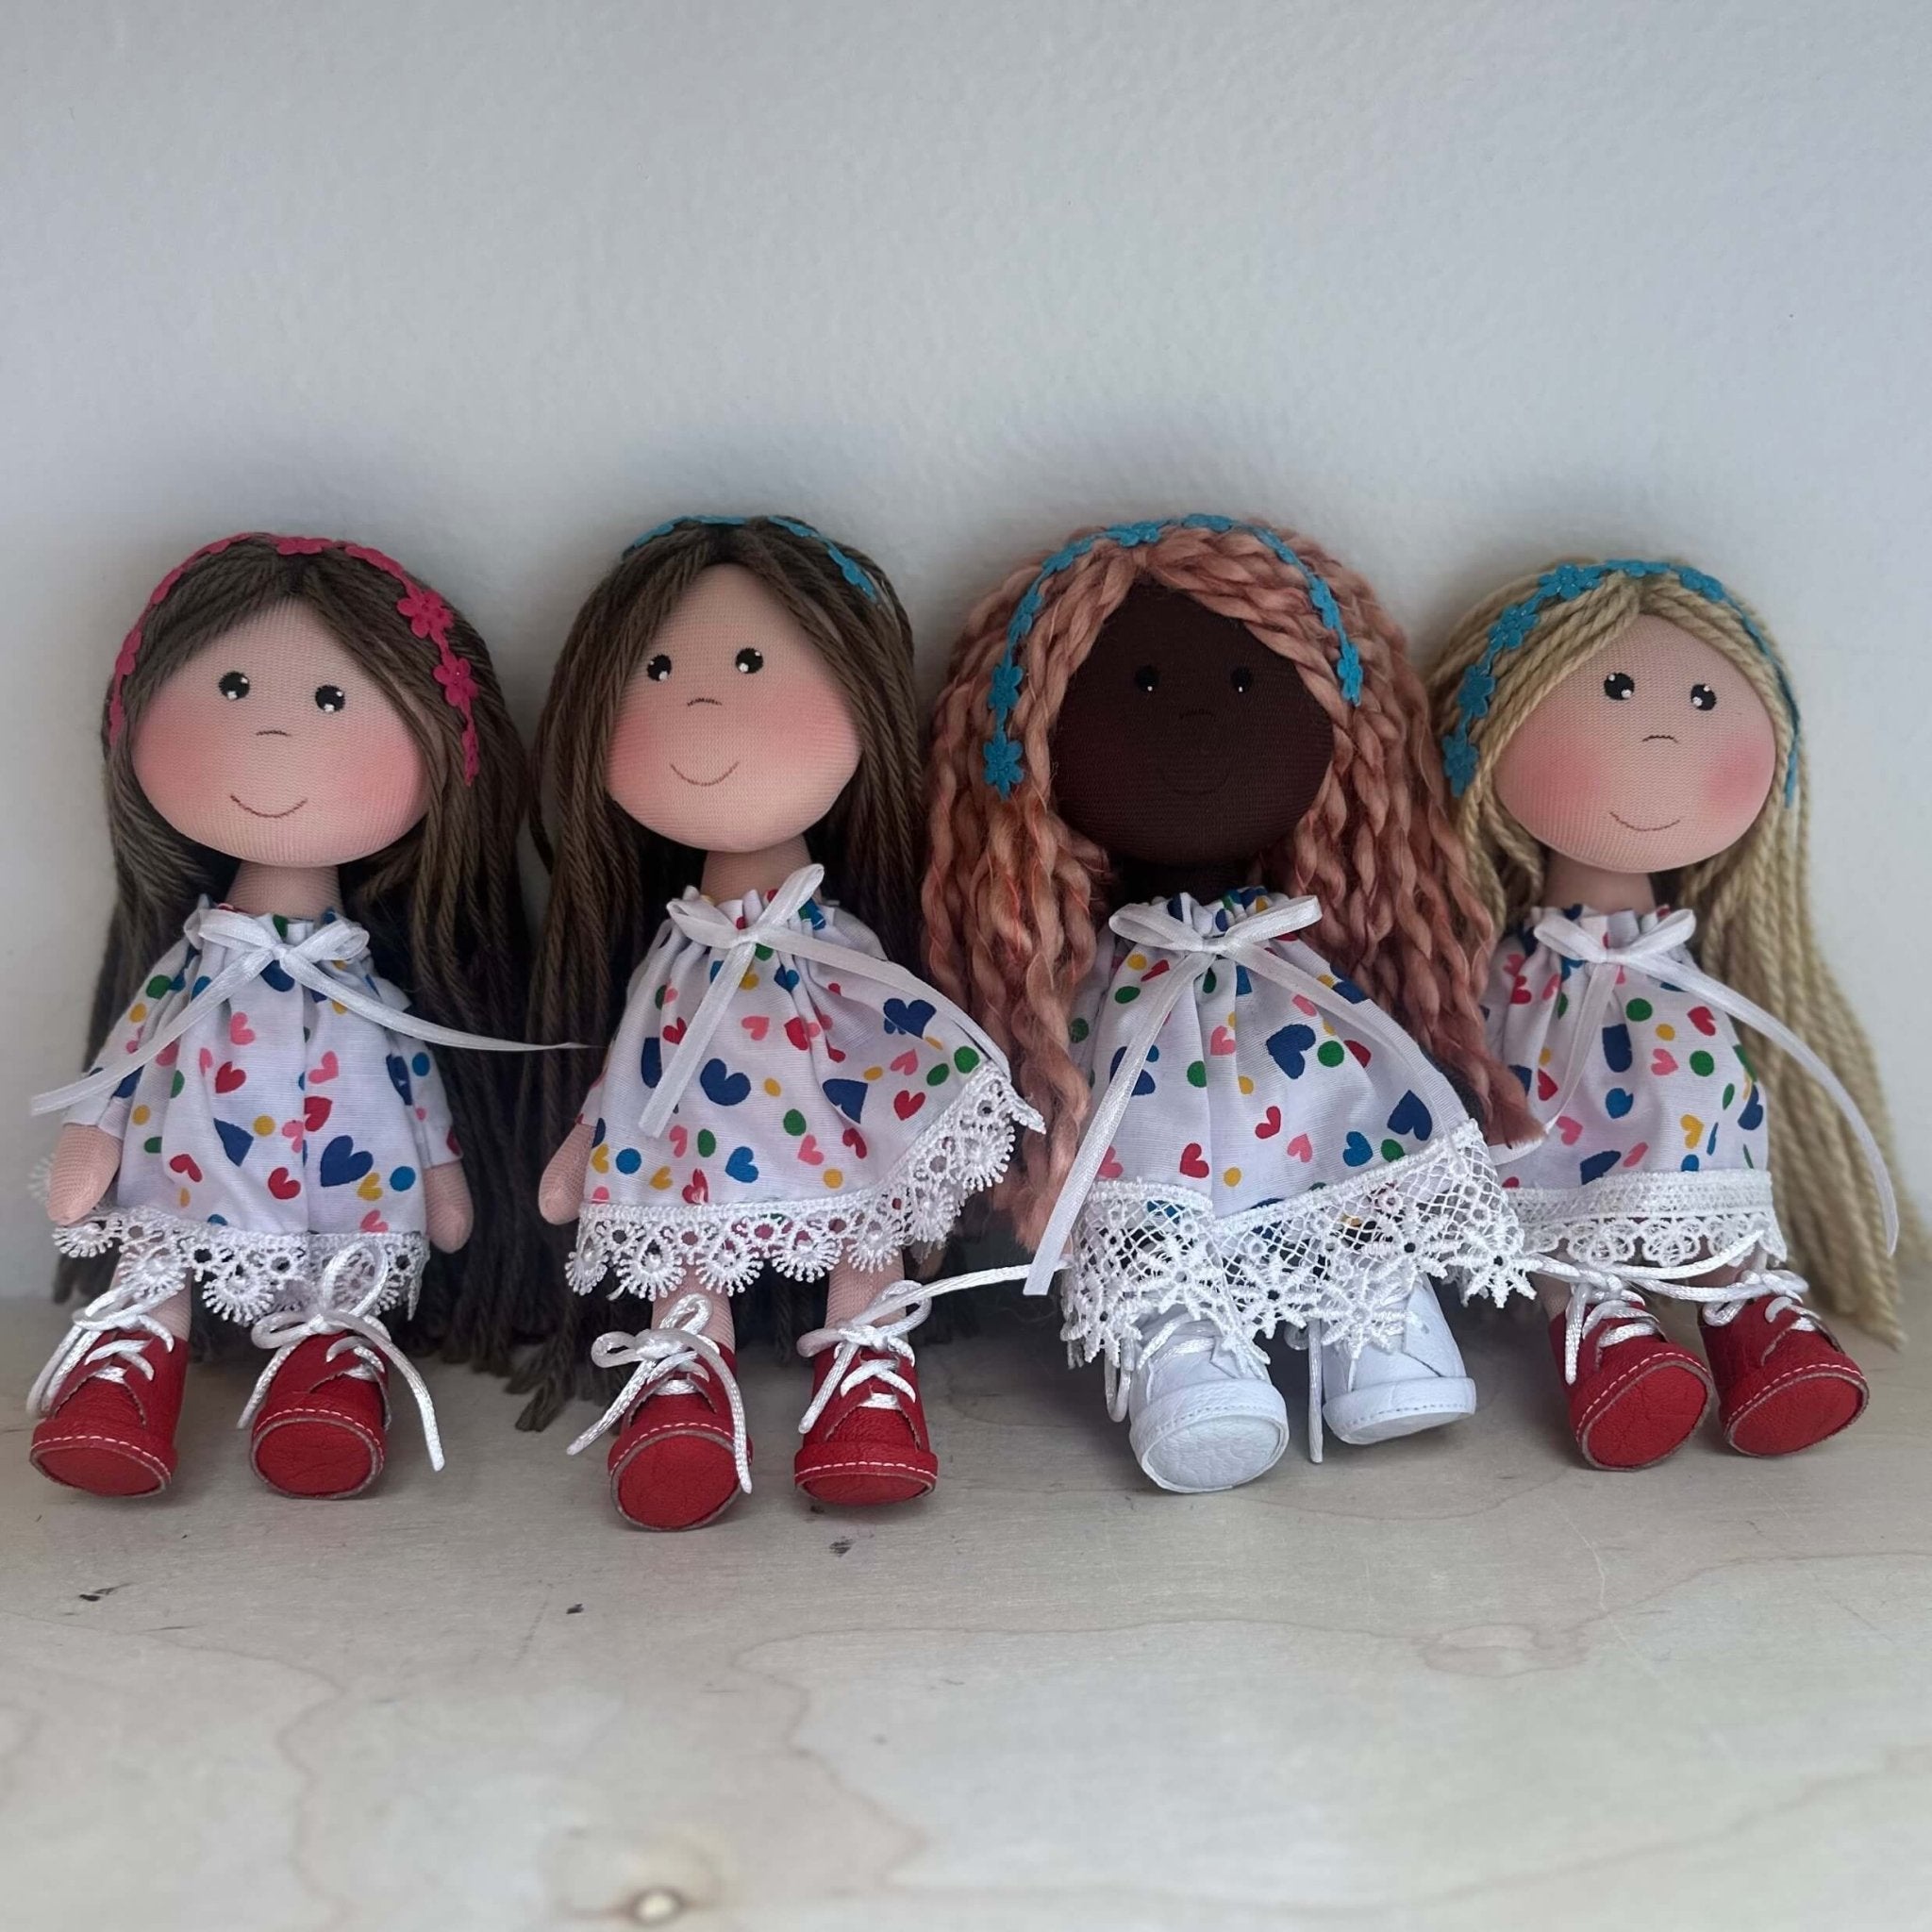 Cute rag dolls handmade in Colombia. There are 4 dolls wearing a white hearts dress with different skin and hair colors. They are also wearing flower headbands.